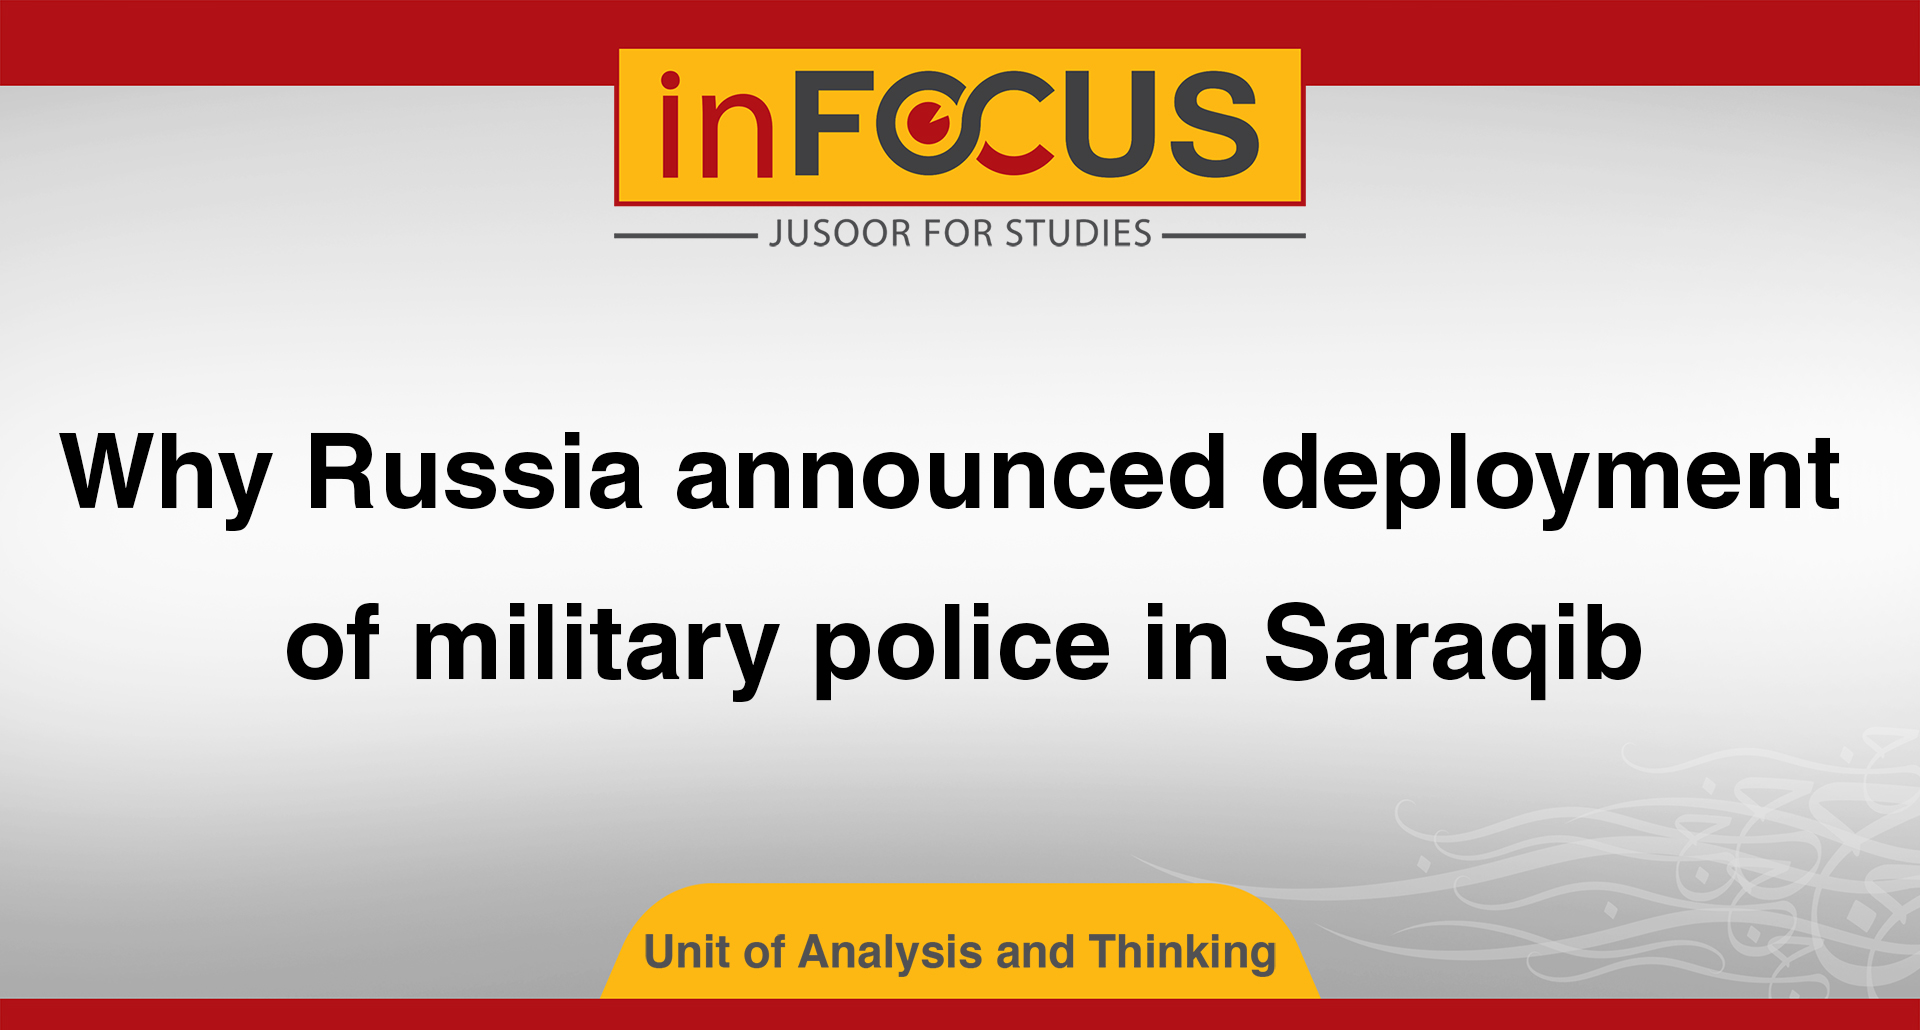 Why Russia announced deployment of military police in Saraqib